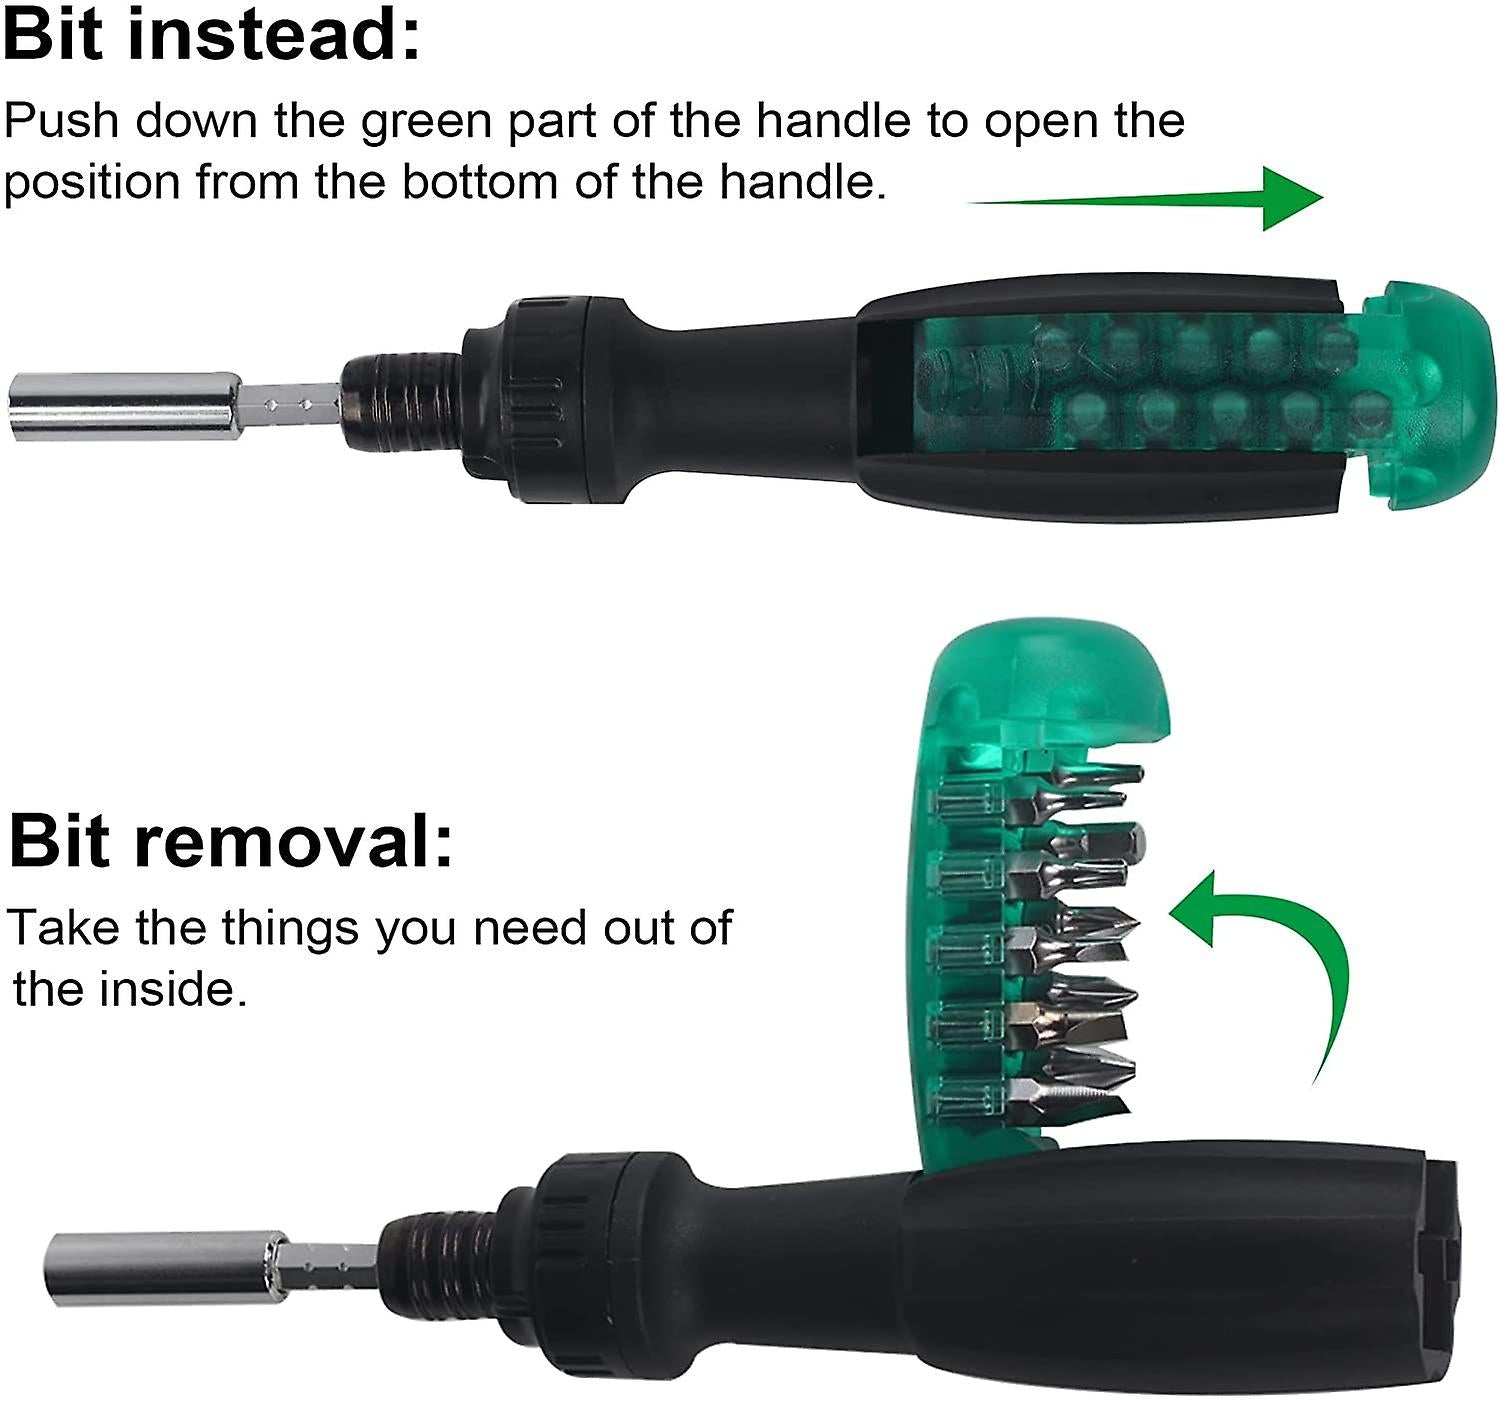 Guidance on how to use the 10-in-1 Ratchet Screwdriver